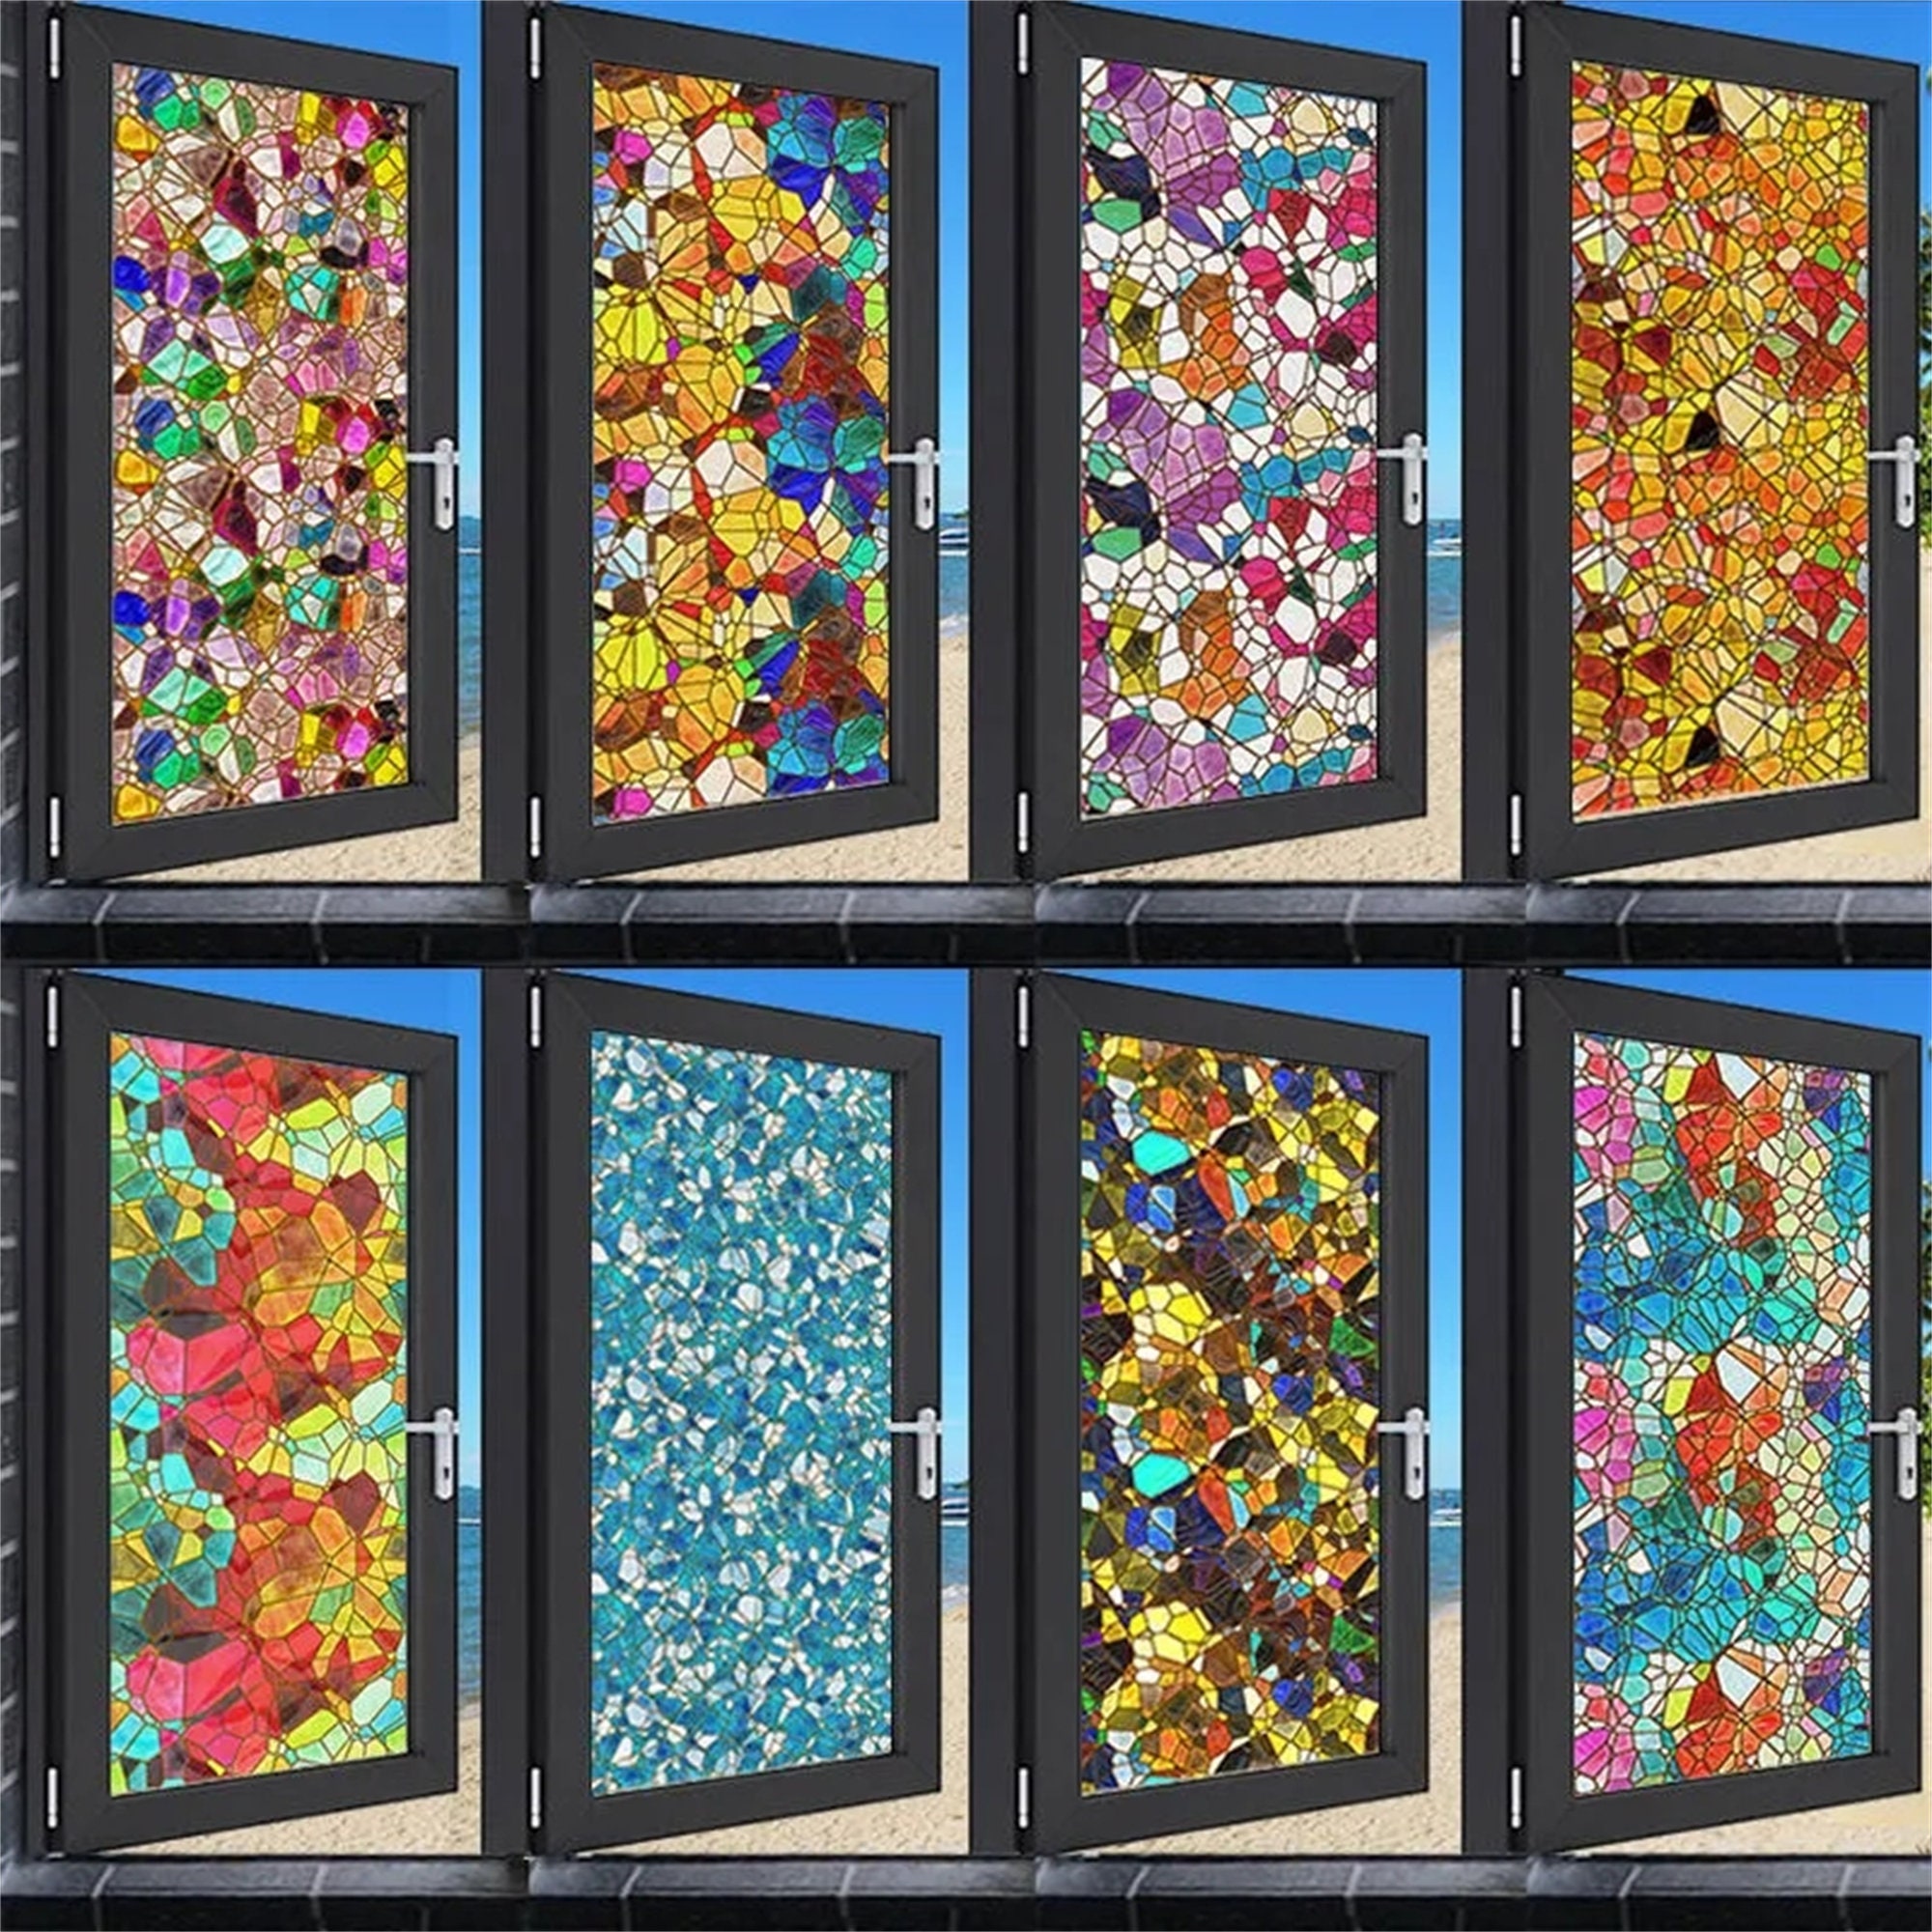  Hengyisha 12 Sheets Transparent Stained Glass Sheets, Rainbow  Colors Stained Glass Supplies, 6X4 Cathedral Glass Mosaic Glass Tiles for  Crafts : Arts, Crafts & Sewing